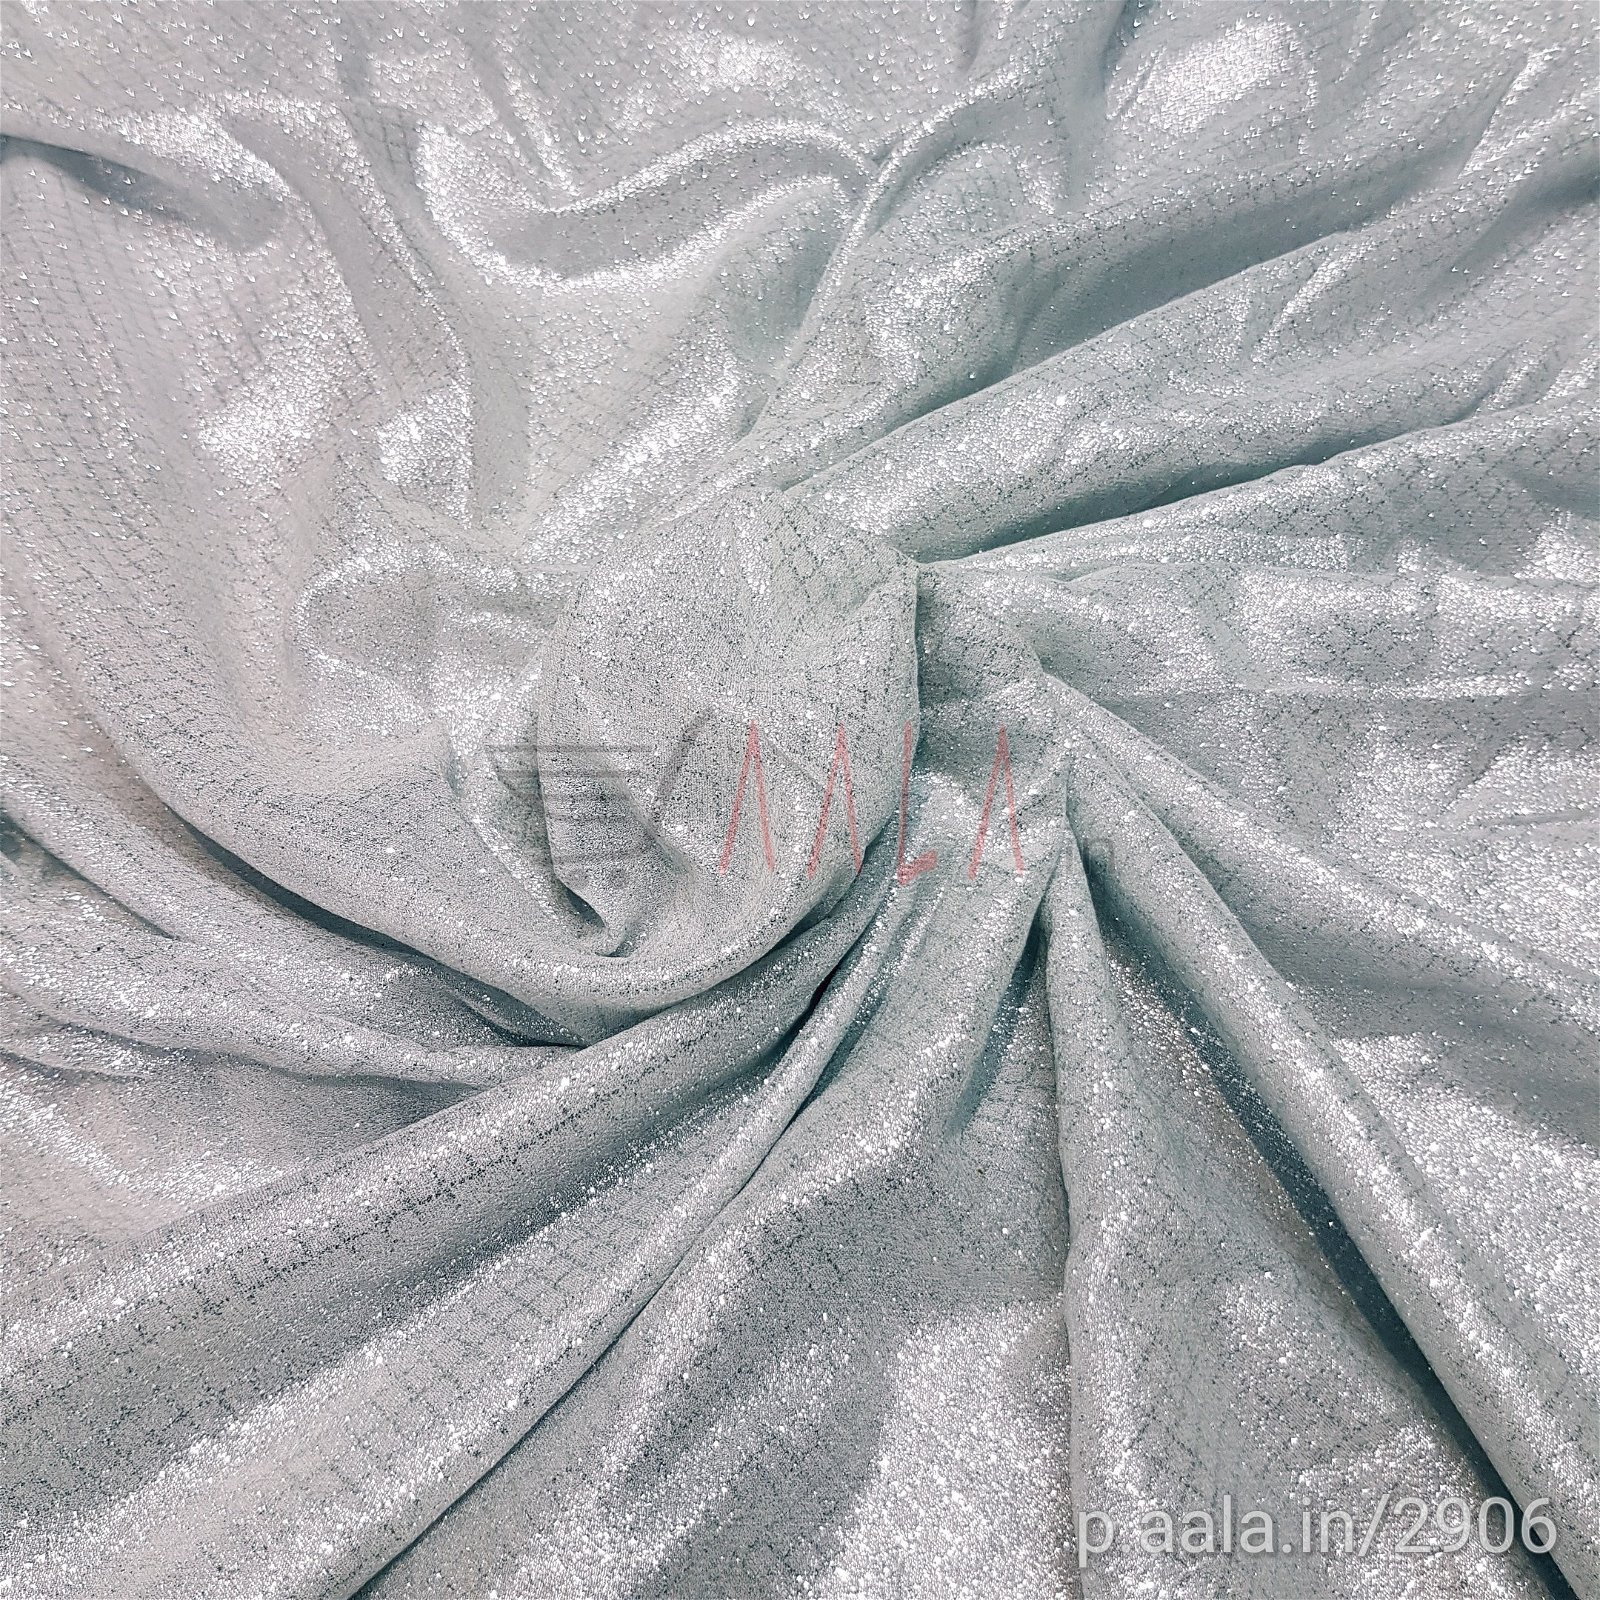 Sparkle Georgette Poly-ester 44 Inches Dyed Per Metre #2906